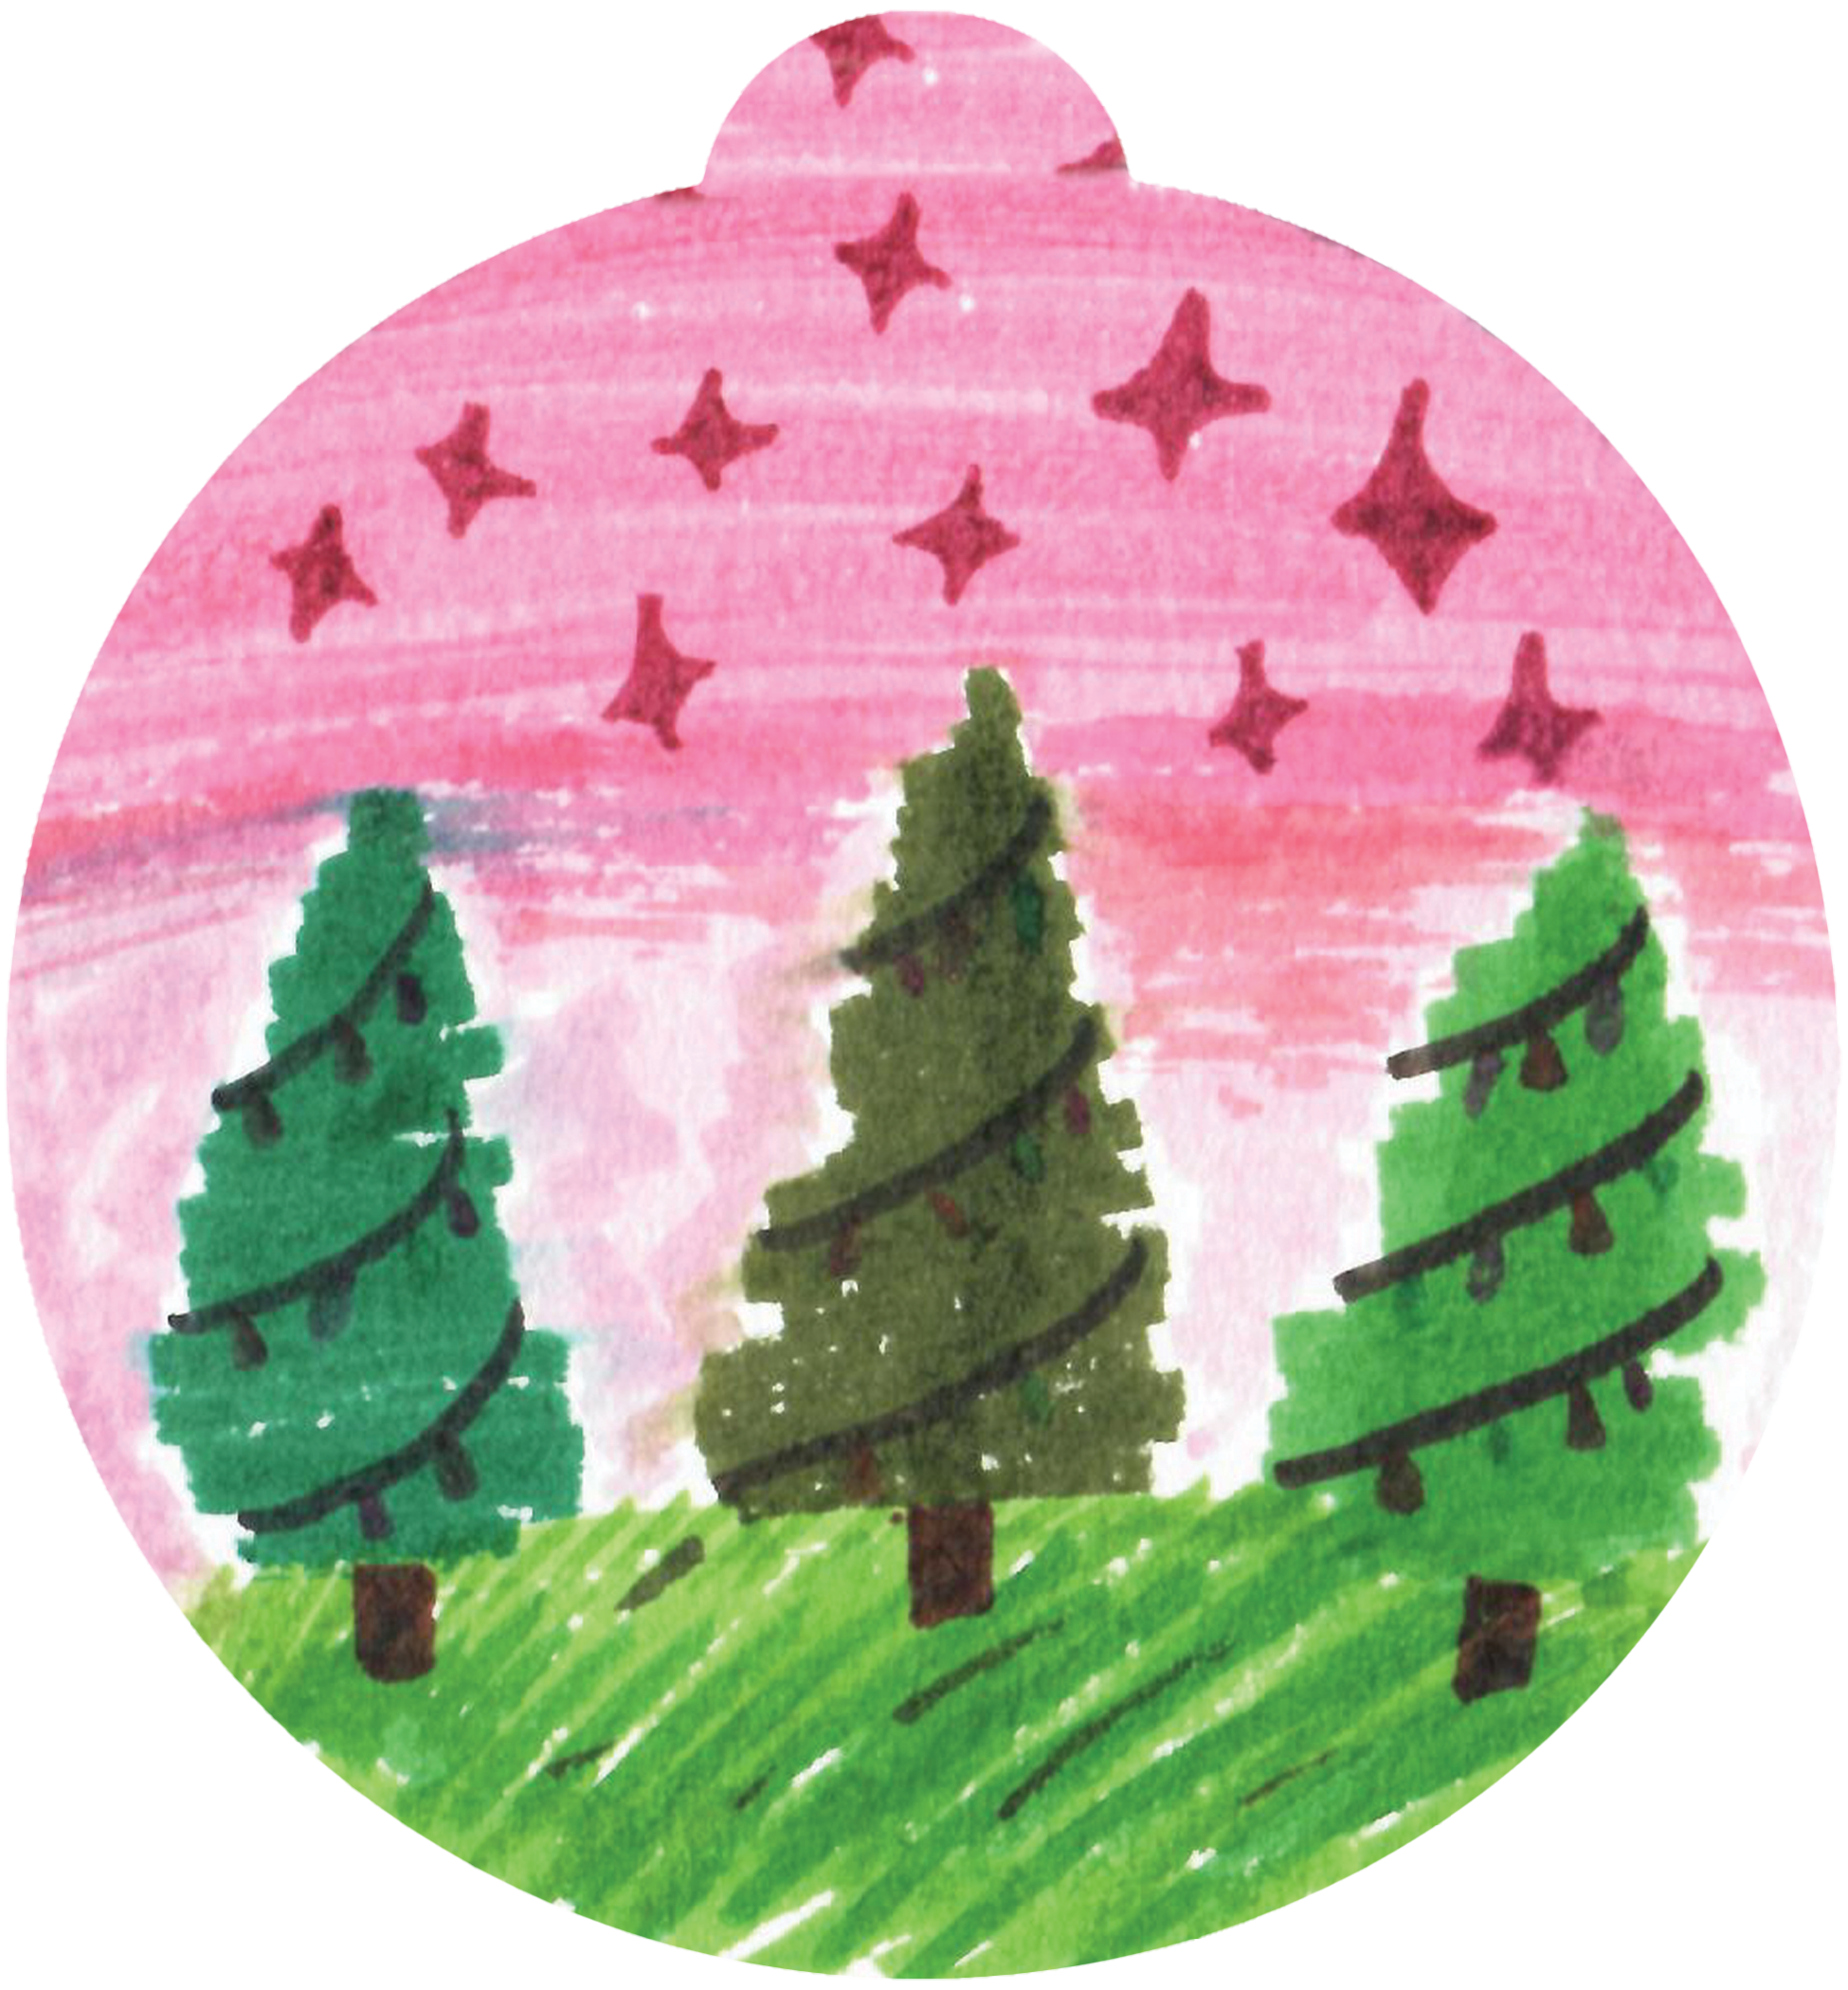 ornament depicting evergreen trees, strung with lights, against a pink starry sky